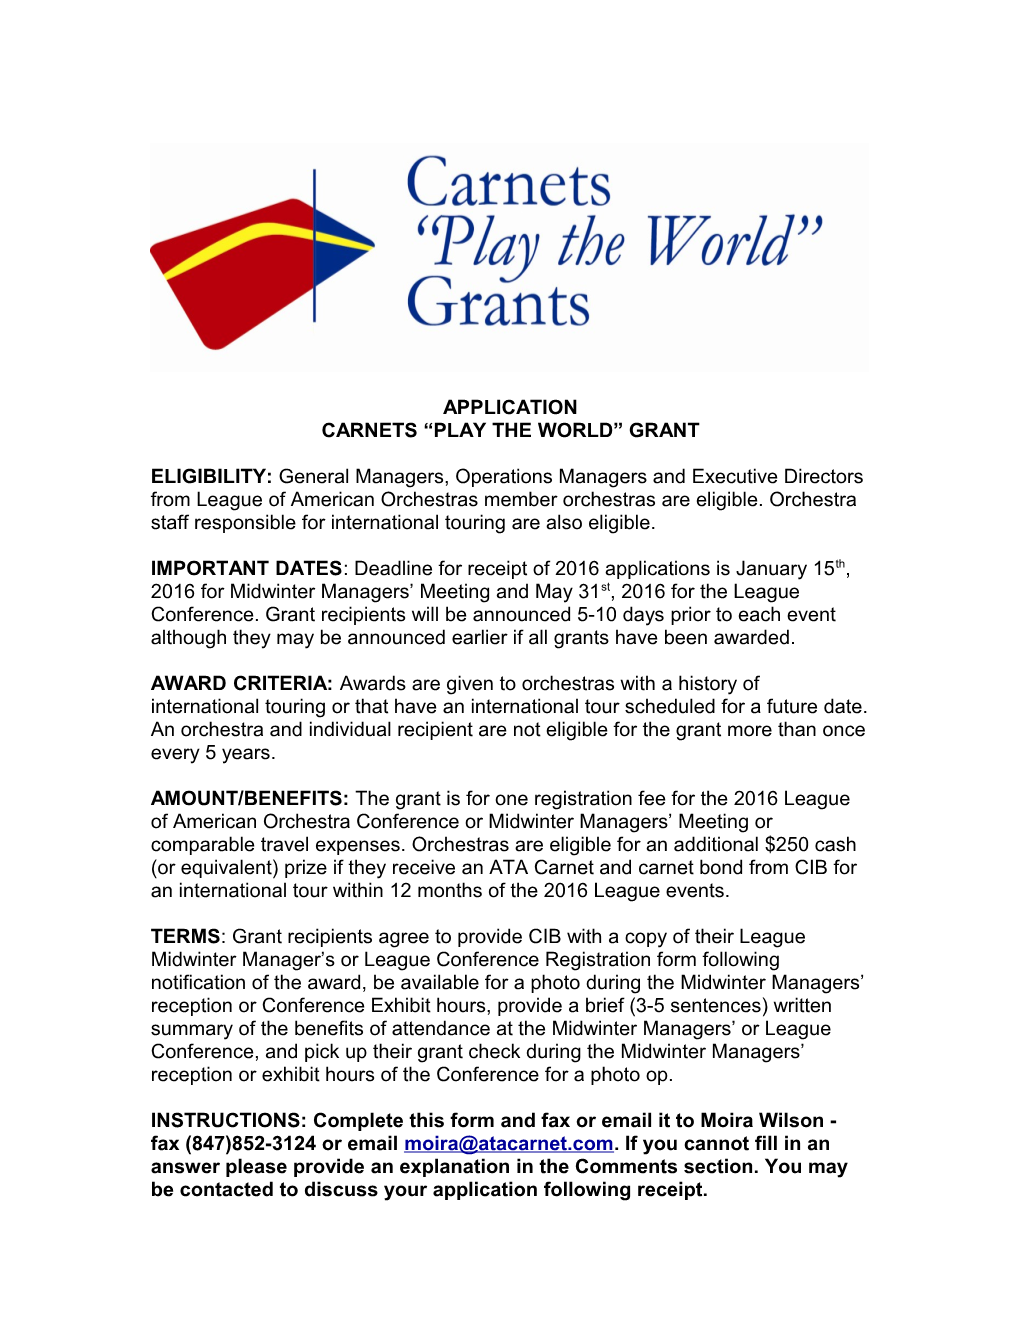 Carnets Play the World Grant